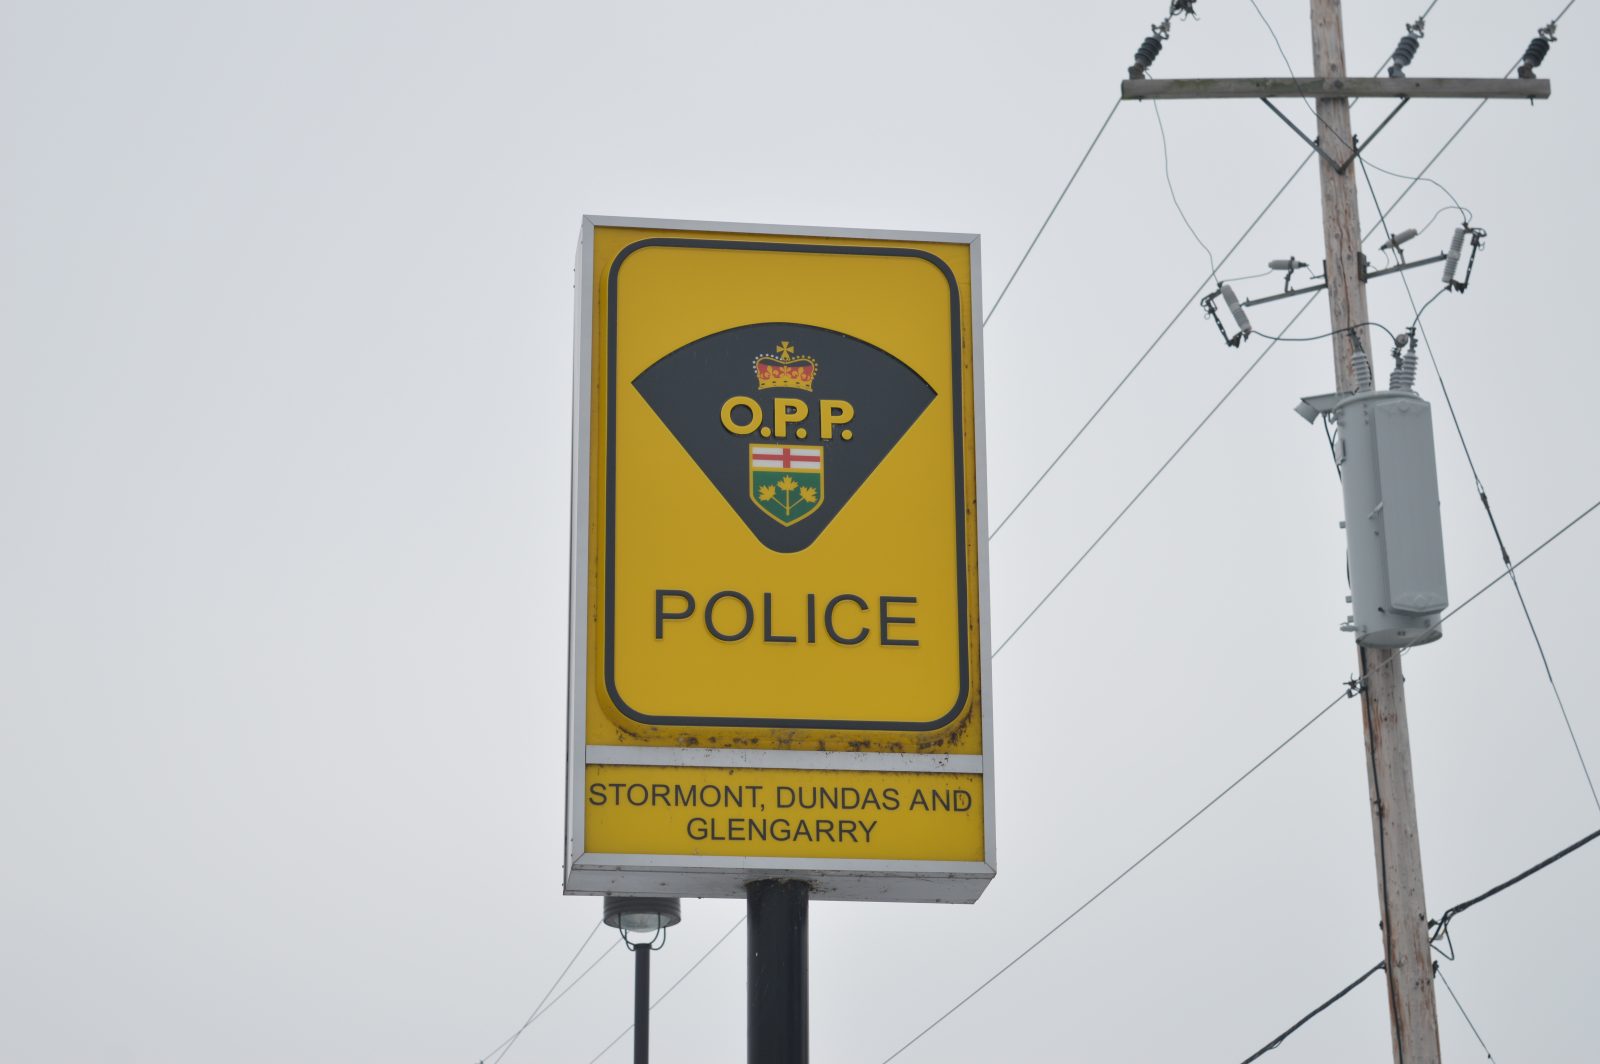 North Glengarry Township audit leads to criminal charges